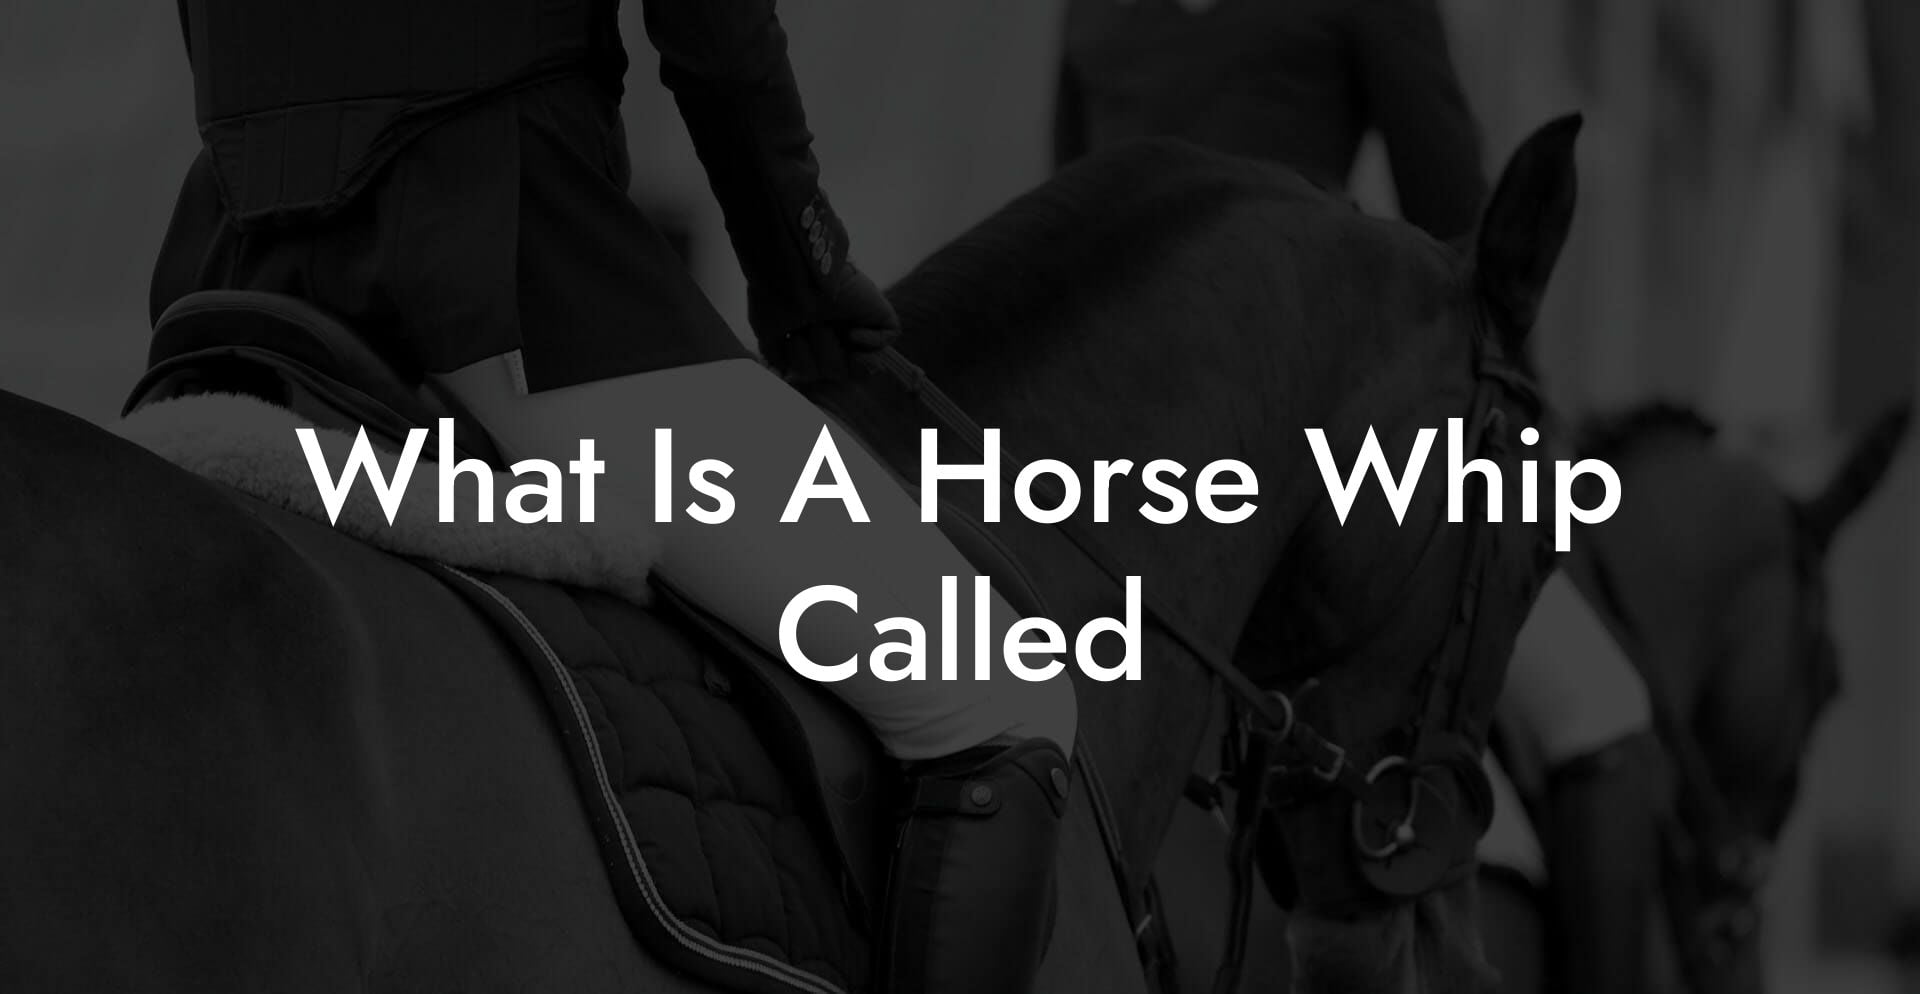 What Is A Horse Whip Called